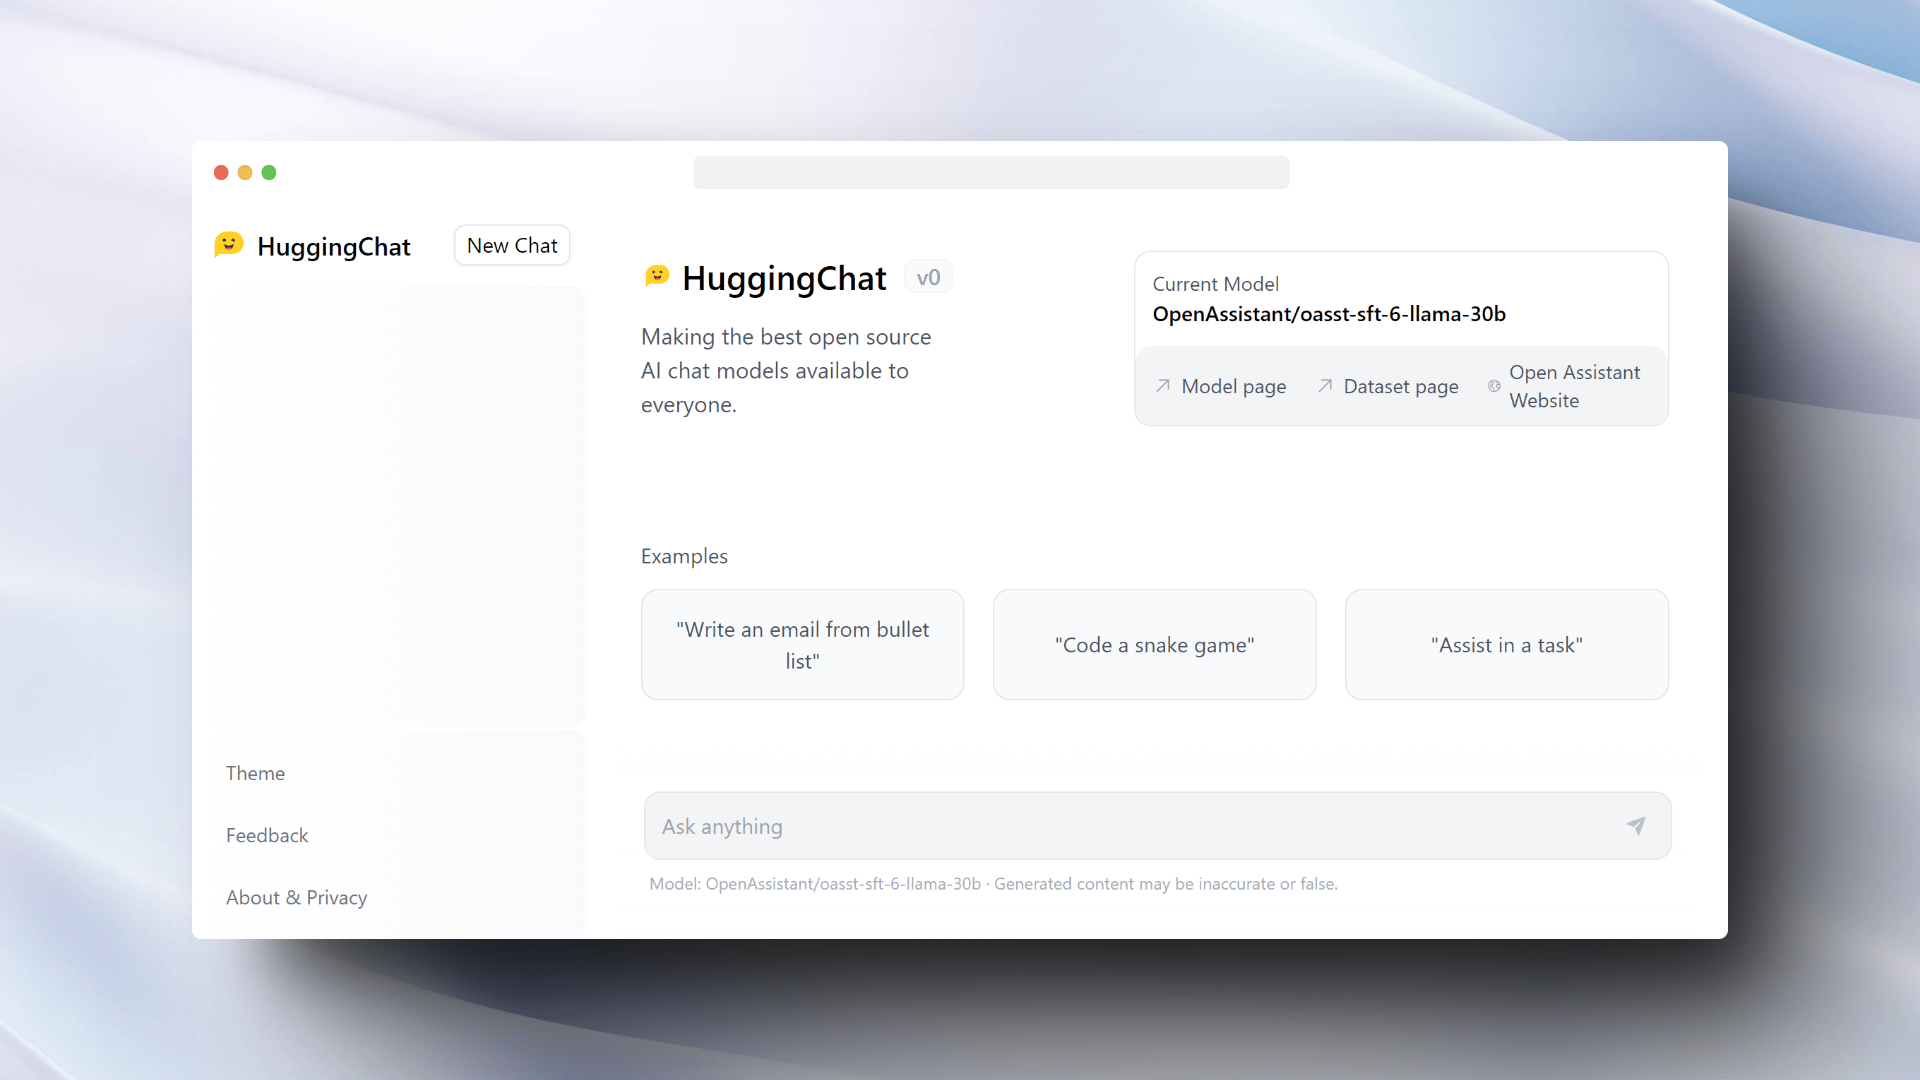 HuggingChat is an open-source alternative to ChatGPT